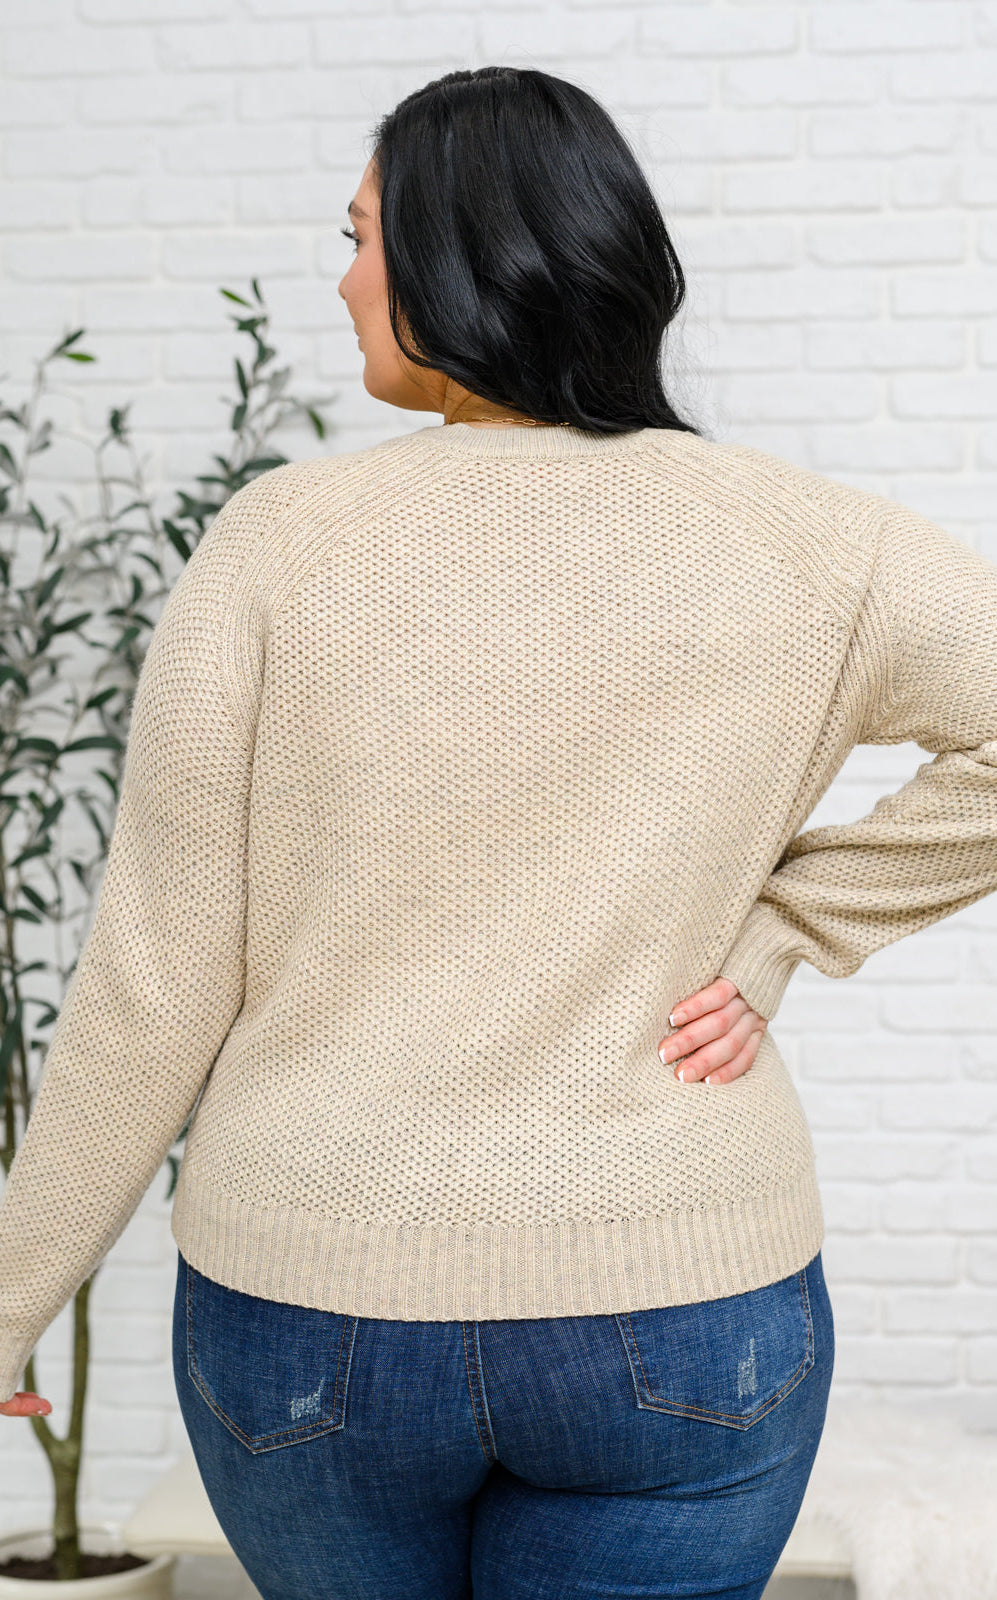 Chai Latte V-Neck Sweater in Oatmeal Ave Shops